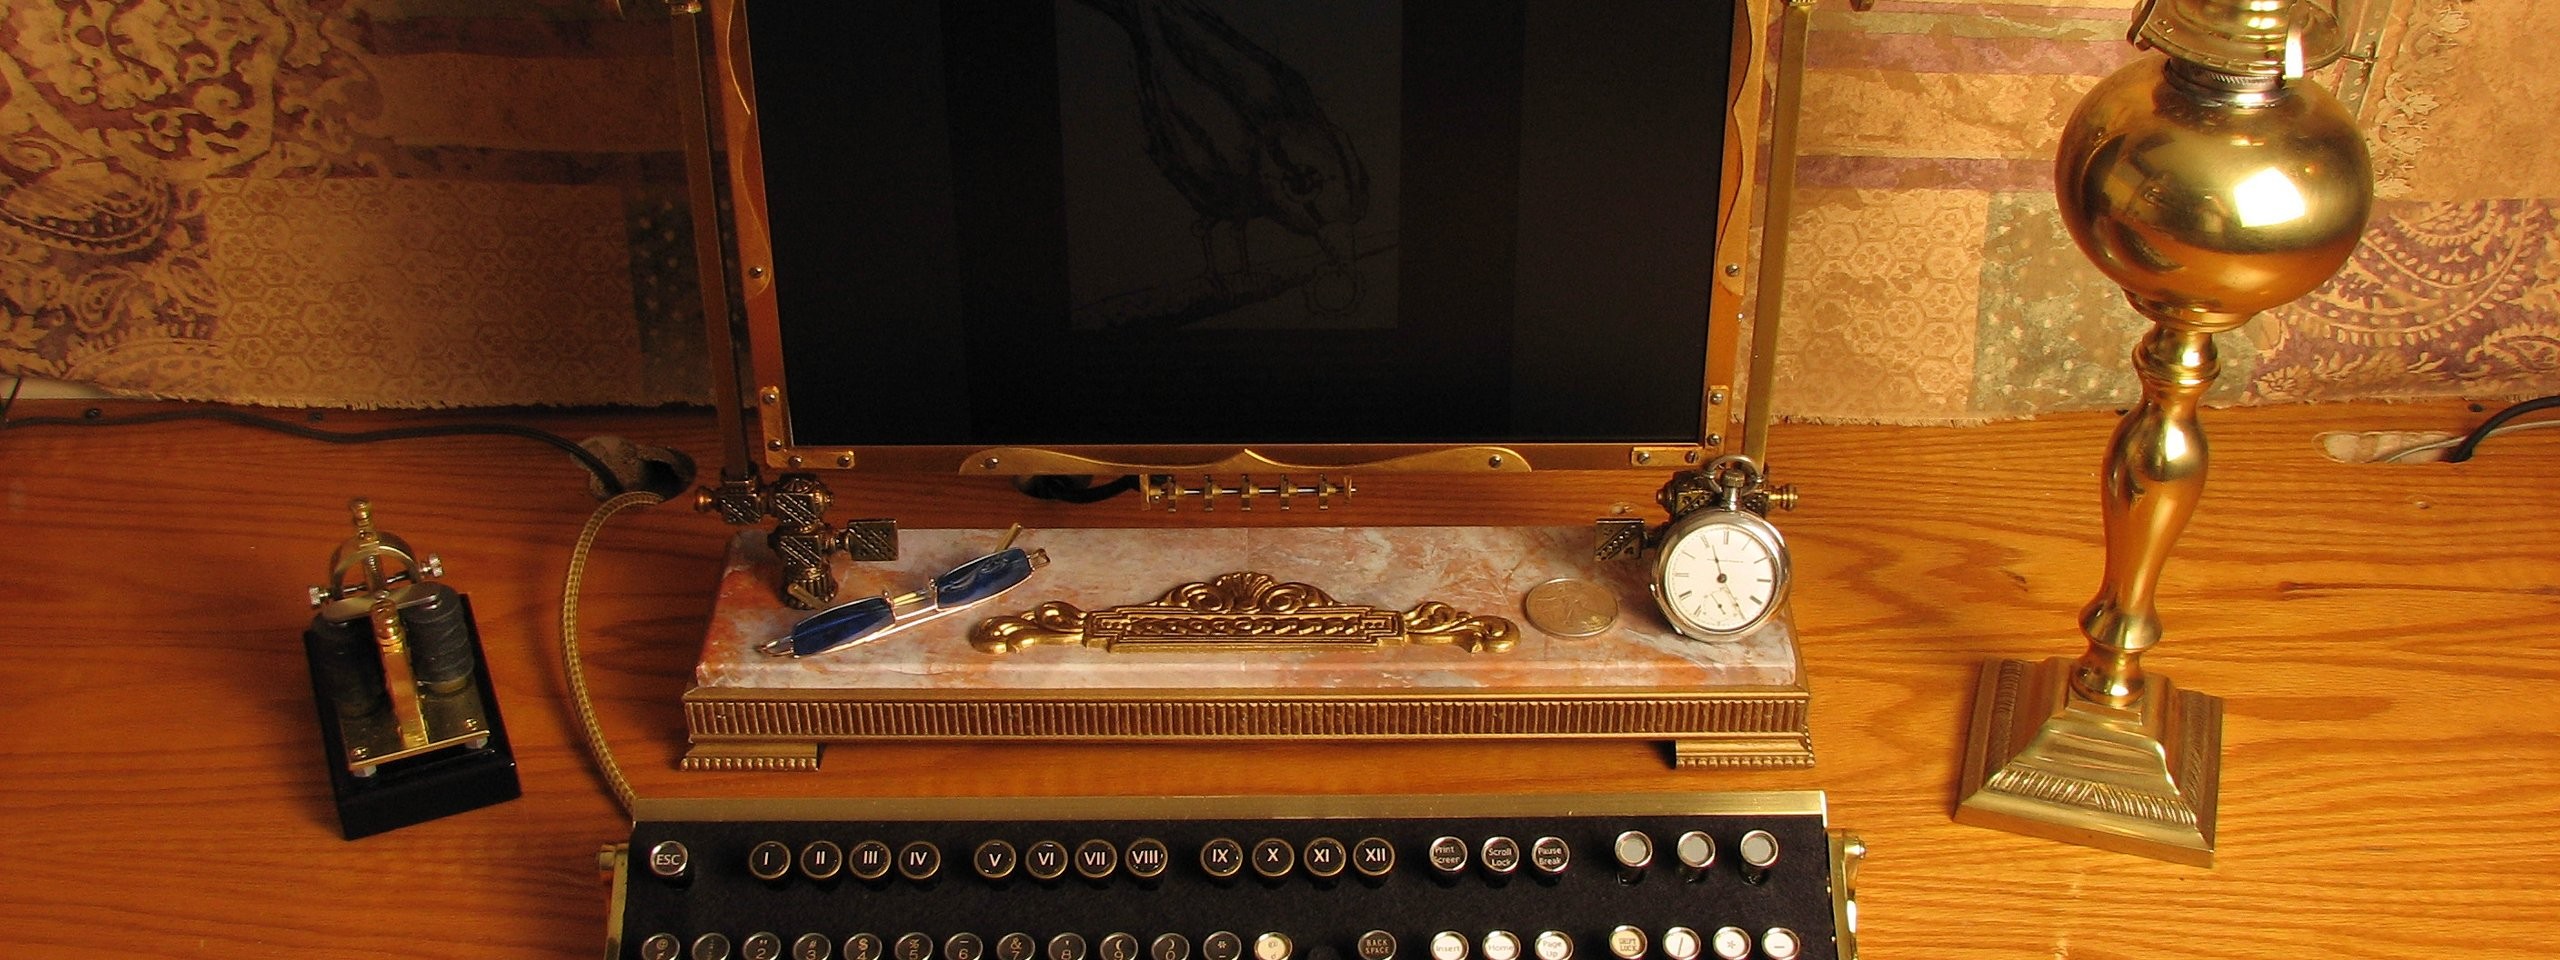 General 2560x960 steampunk keyboards numbers technology clocks computer